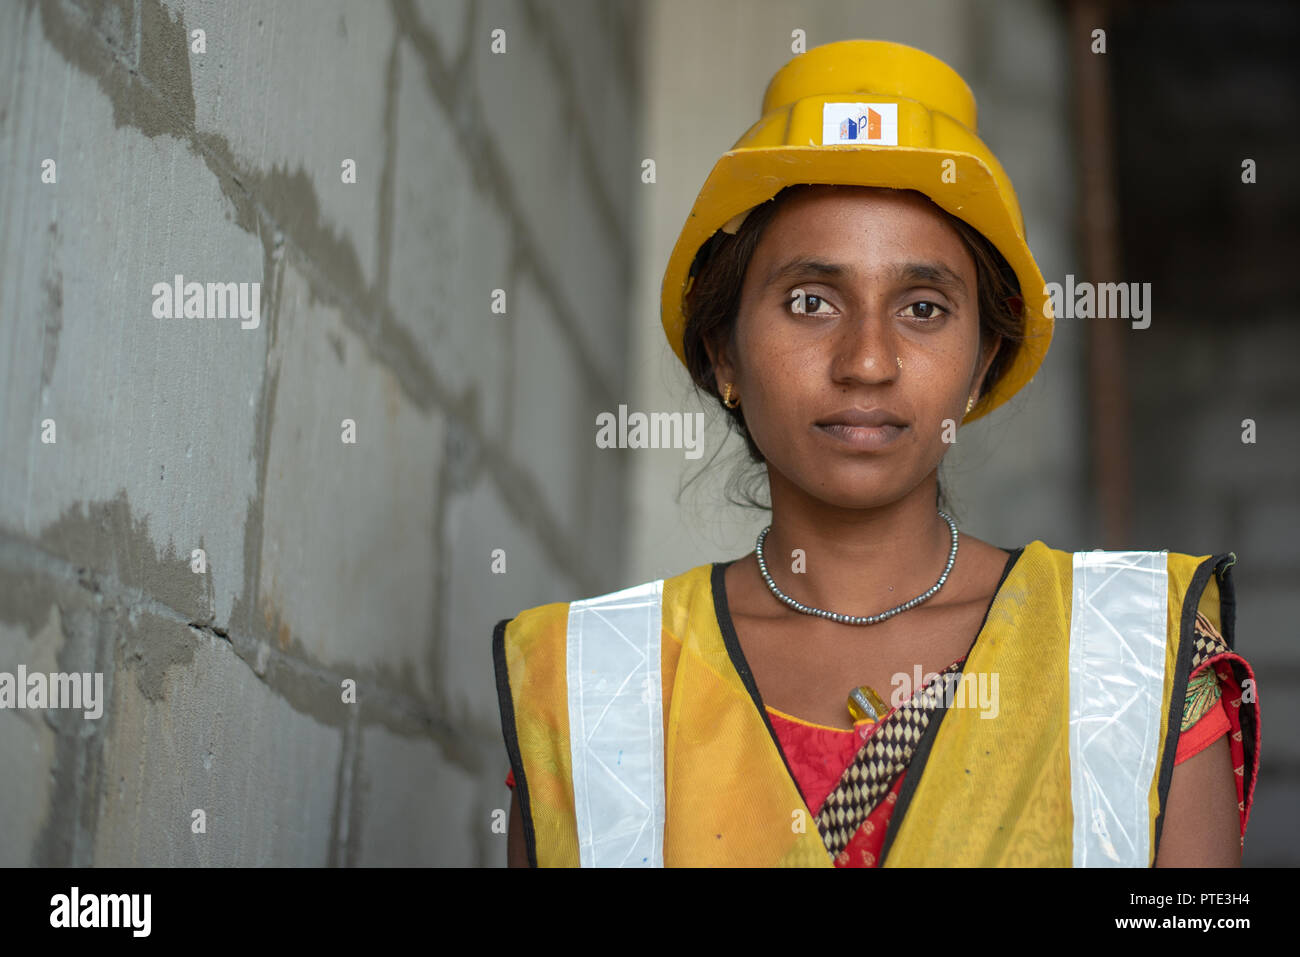 Woman labourer with the safety wear at building construction site. Urban cities in India is seeing lots of development projects. Stock Photo